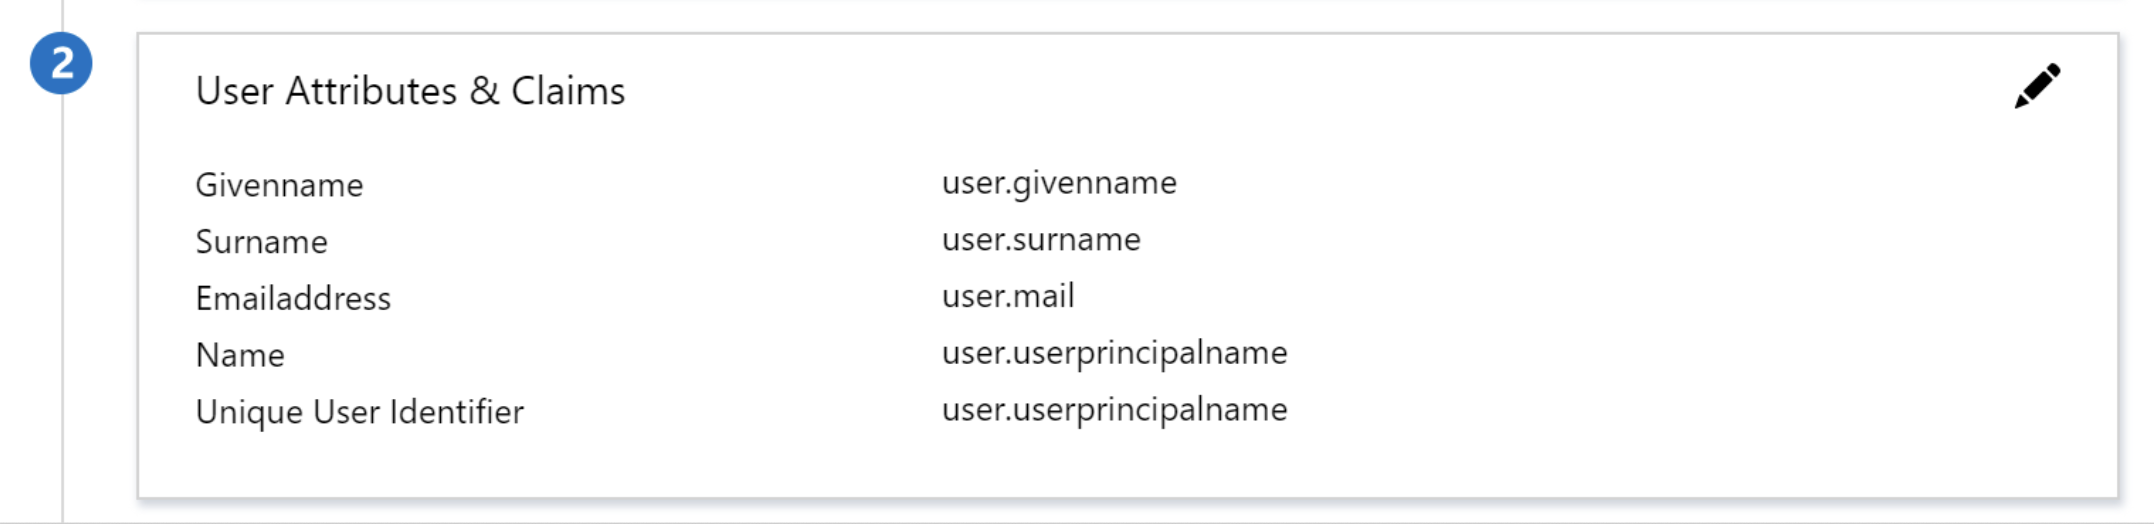 User Attributes section of the Application Integration page in Azure.